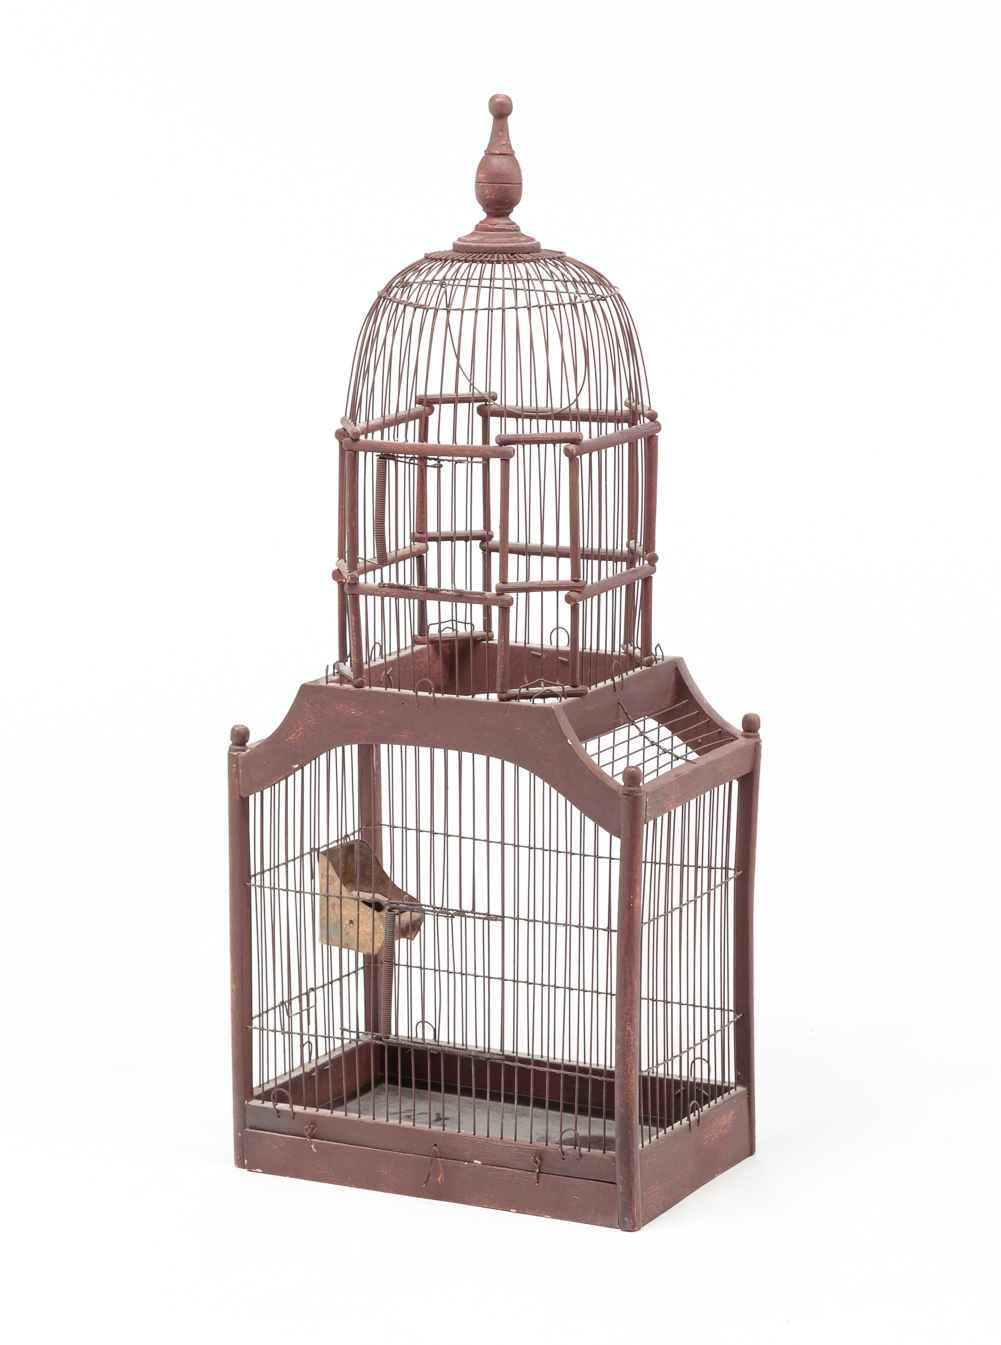 ASIAN BIRDCAGE. Late 20th century. Building